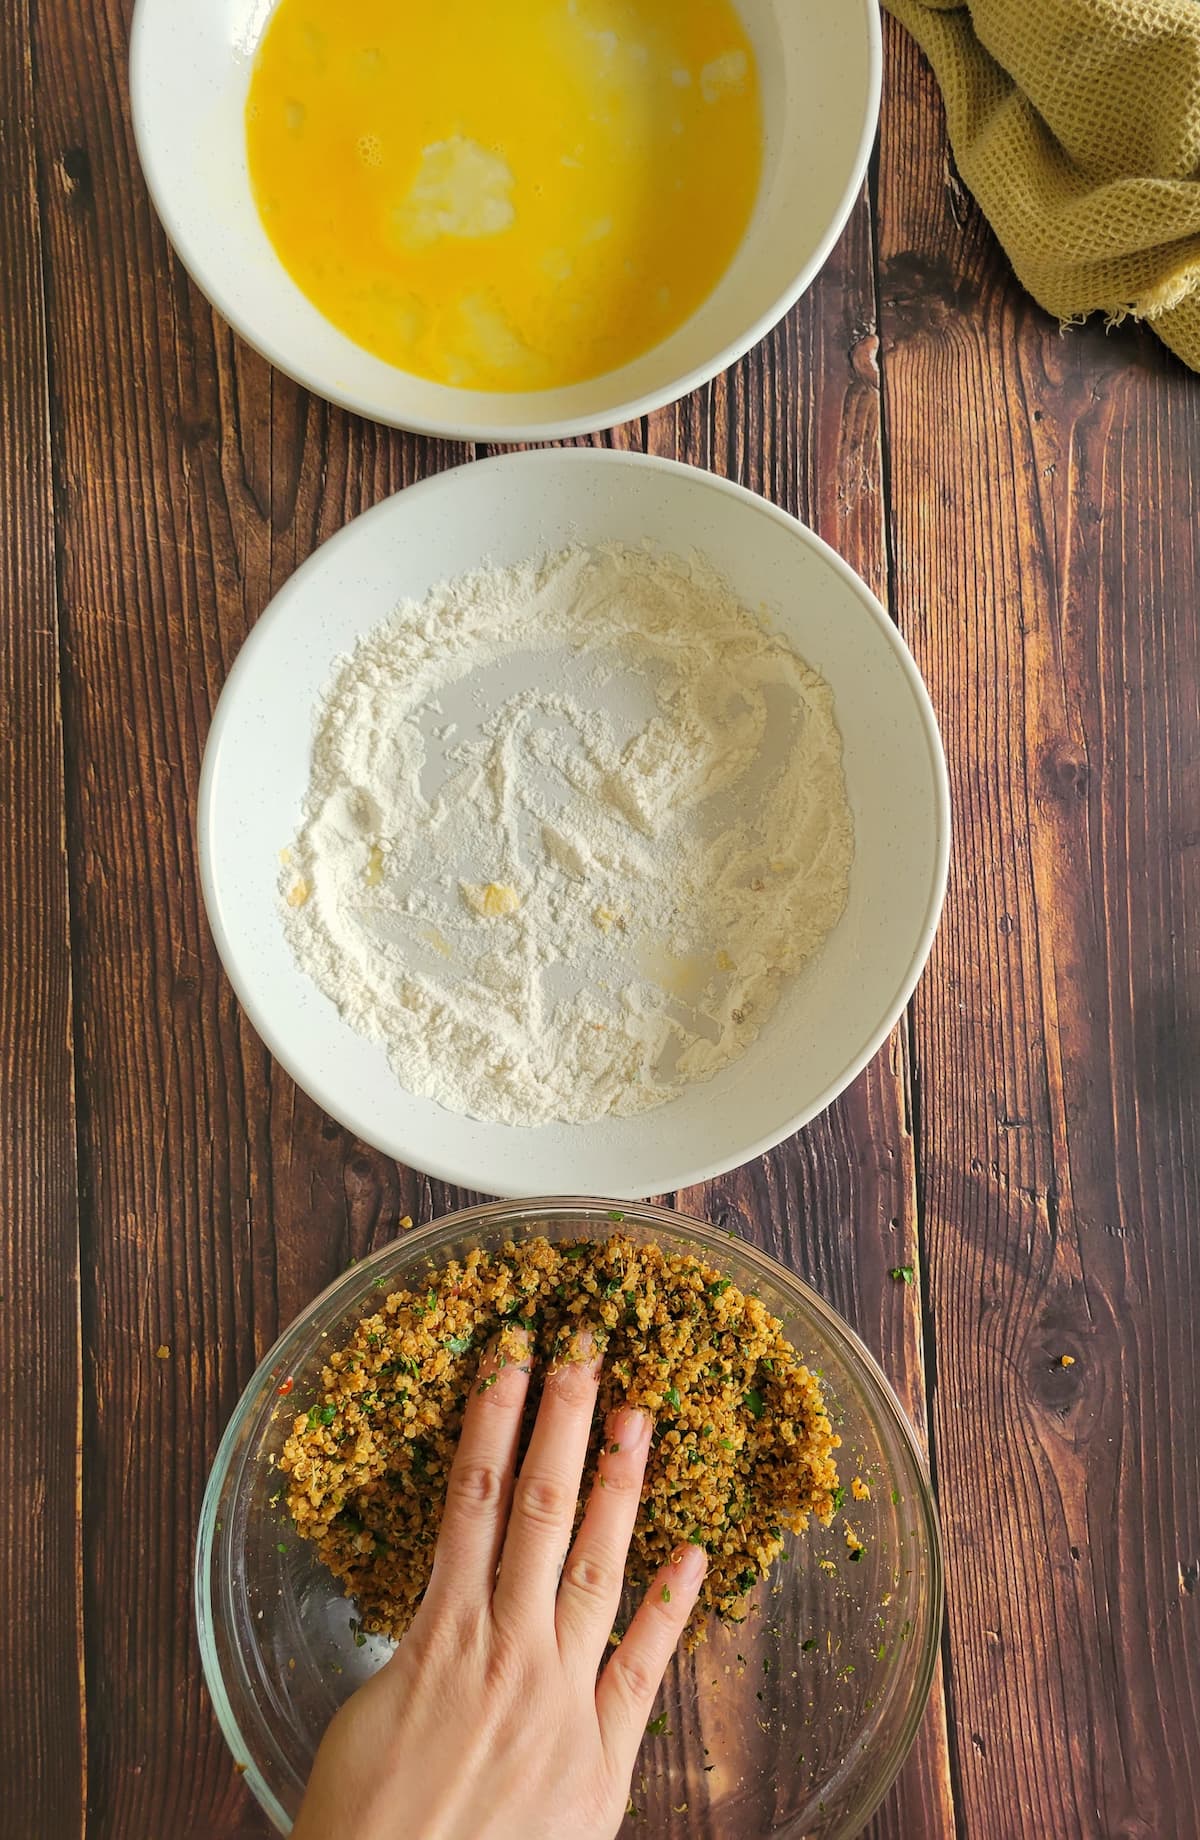 three bowls - one of beaten egg, one of flour and one with a hand in a quinoa coating mixture